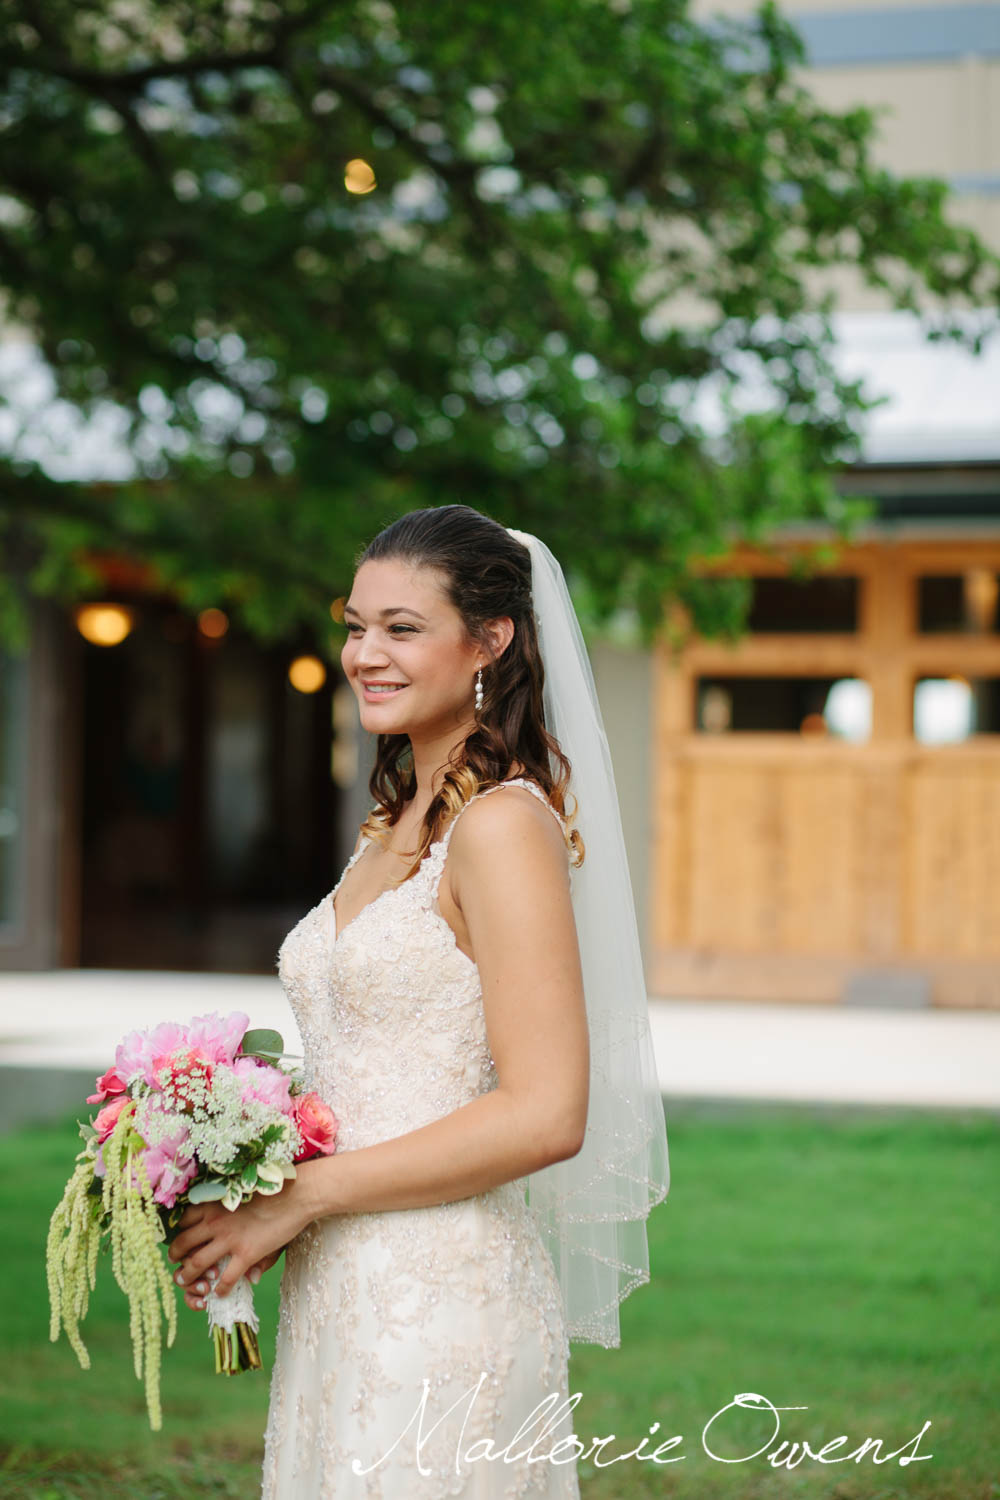 Bridal Session in Austin, Texas | MALLORIE OWENS